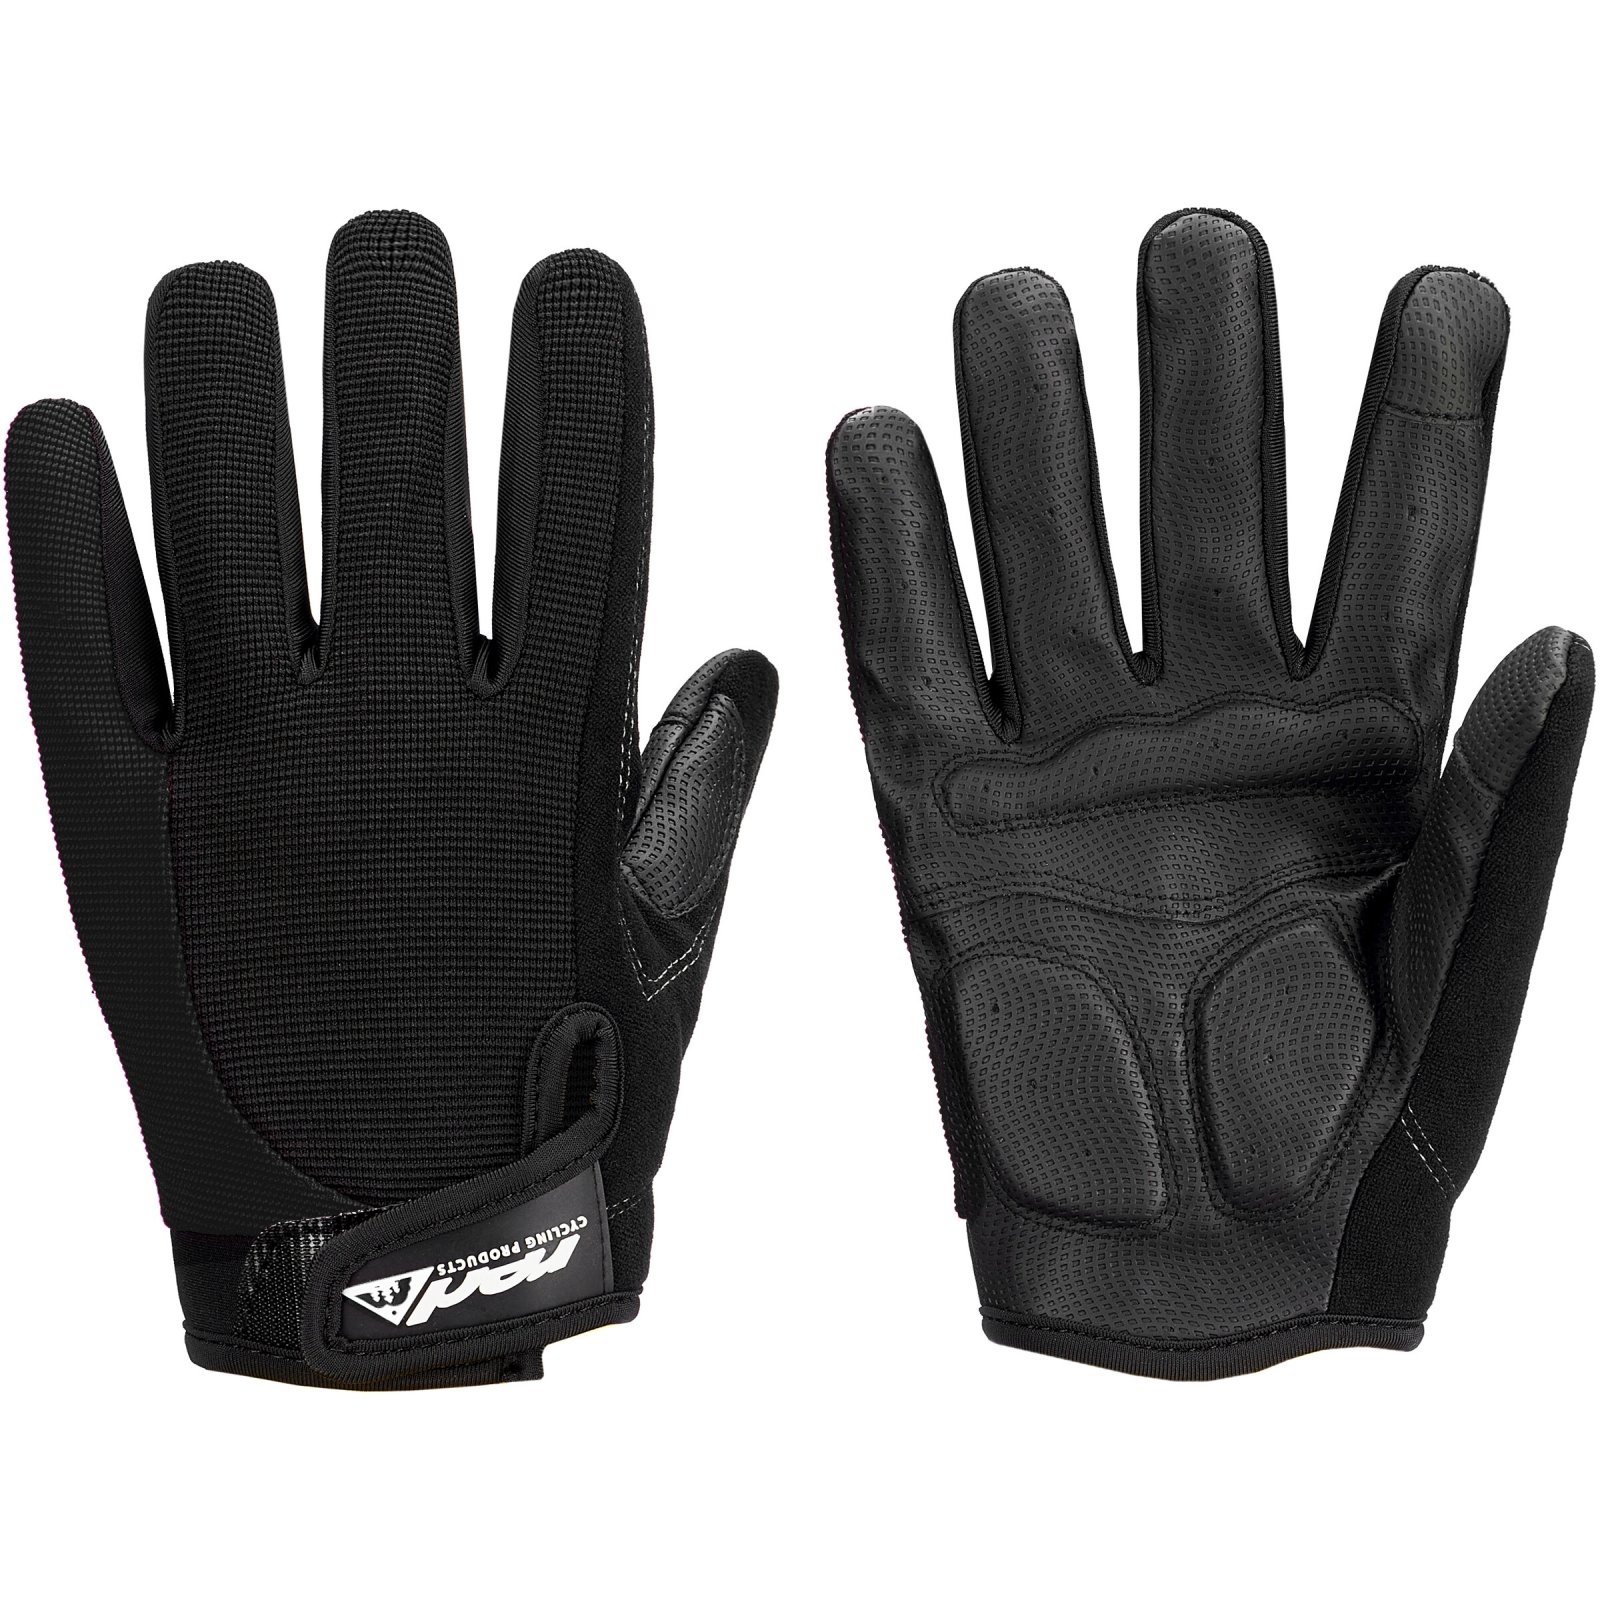 red-cycling-products-vital-long-finger-padded-gloves-black-black-1.jpg